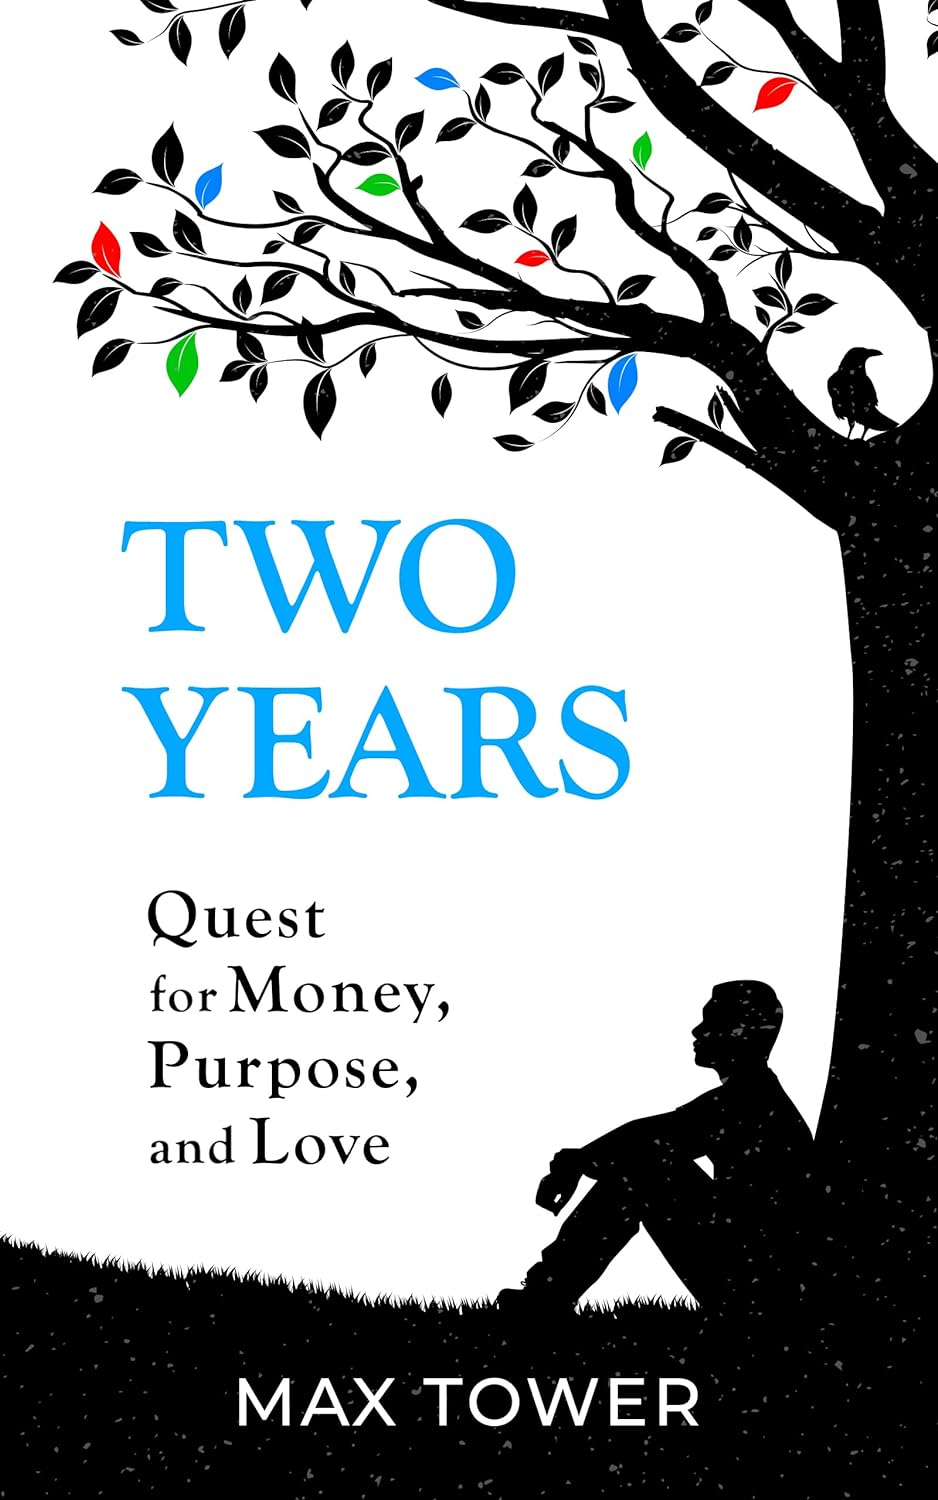 New book "Two Years: Quest for Money, Purpose, and Love" by Max Tower is released, an inspiring memoir that chronicles world travel, spiritual transformation, and life with meaning